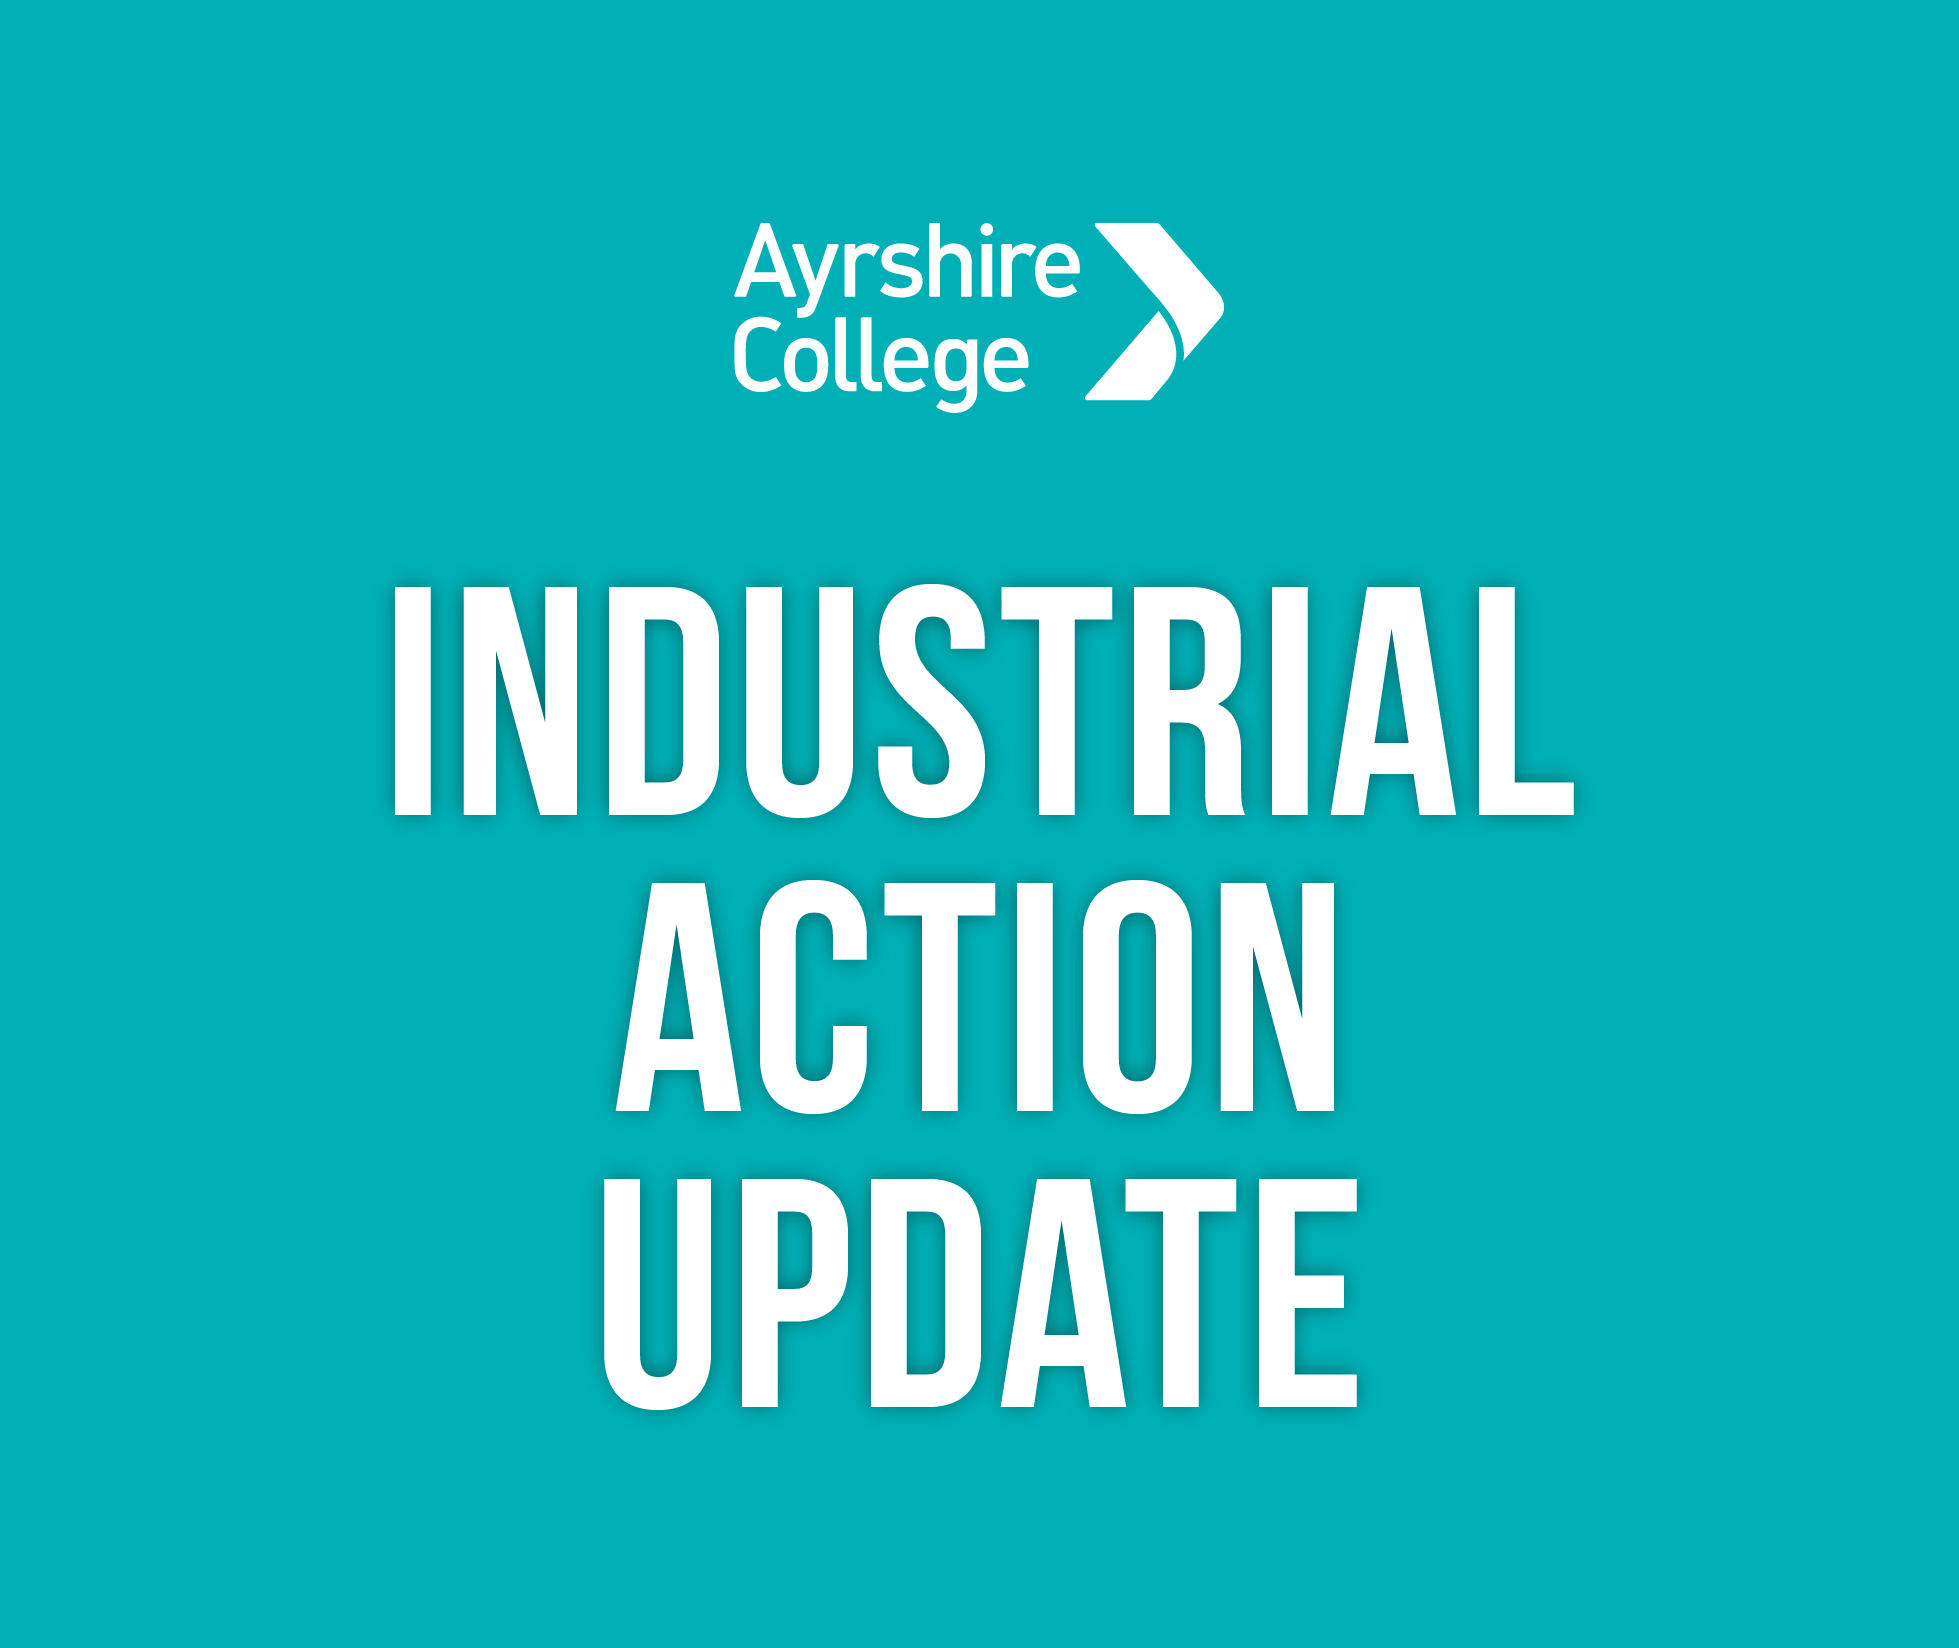 Industrial Action - Updated on Wednesday 30 March